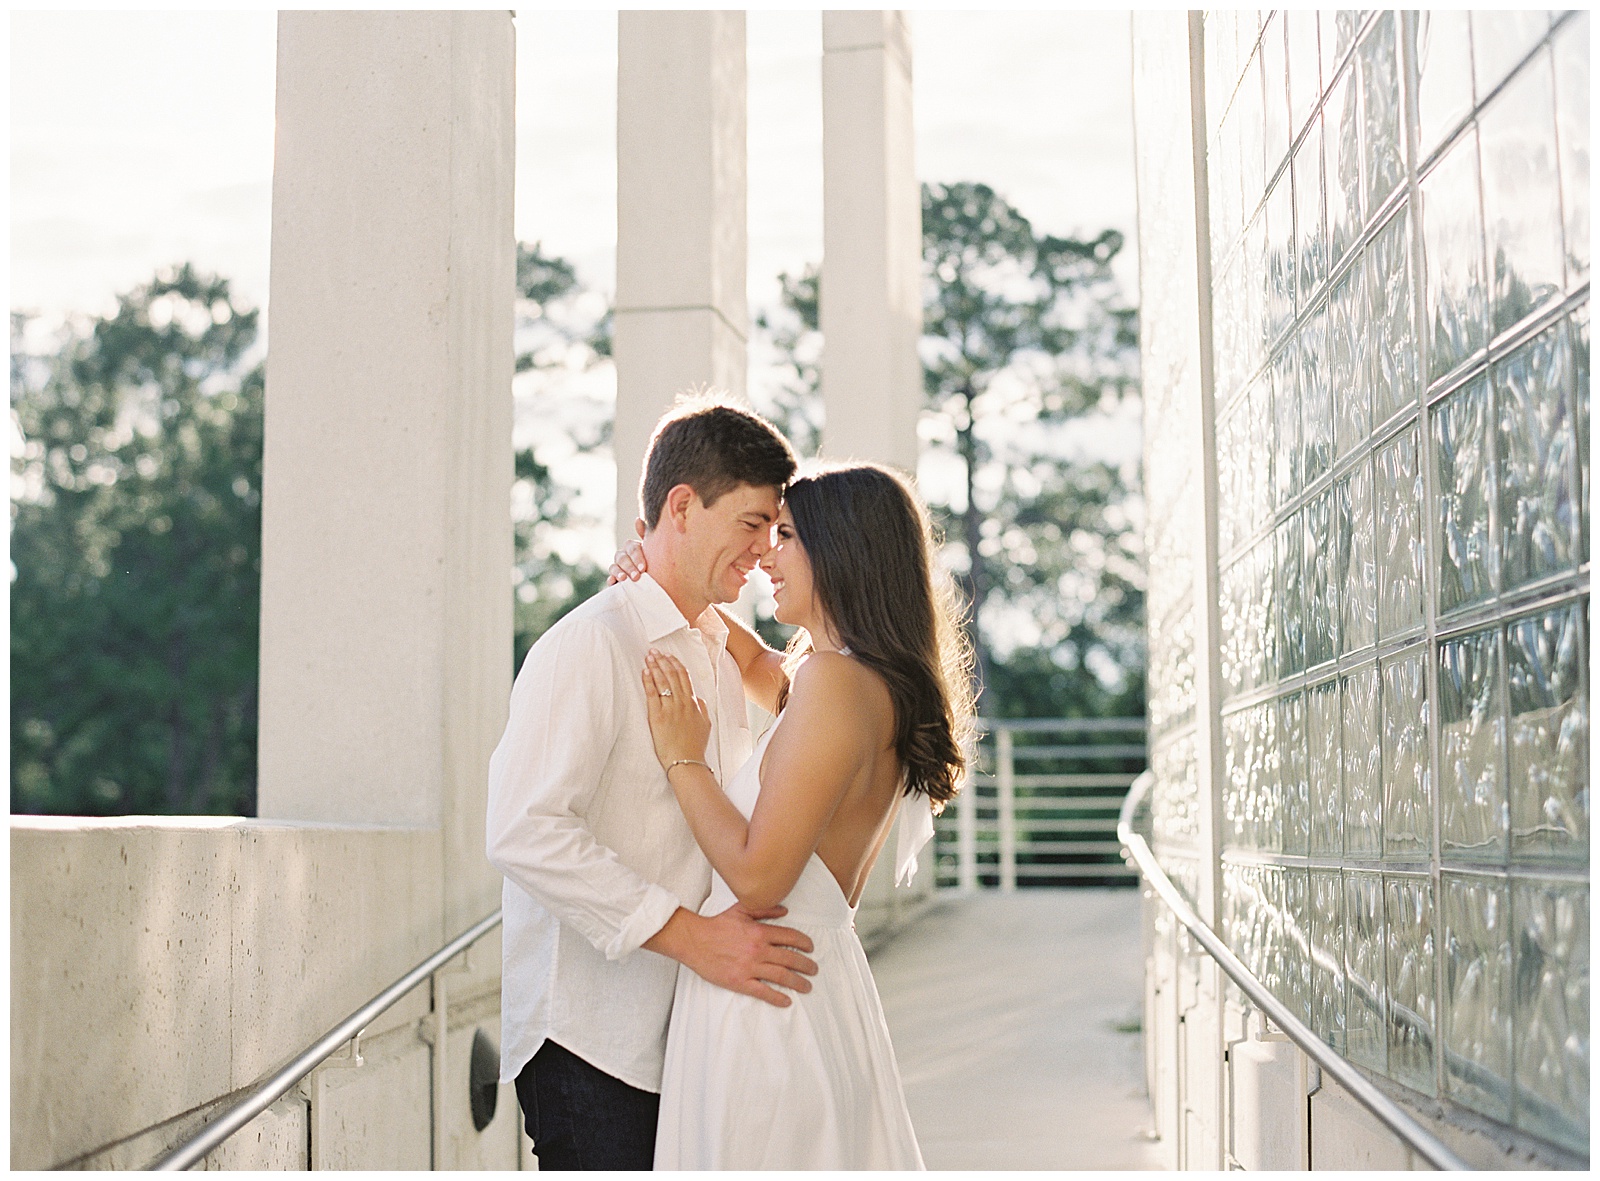 Couple wearing white poses outside New Orleans Museum of Art during sunset